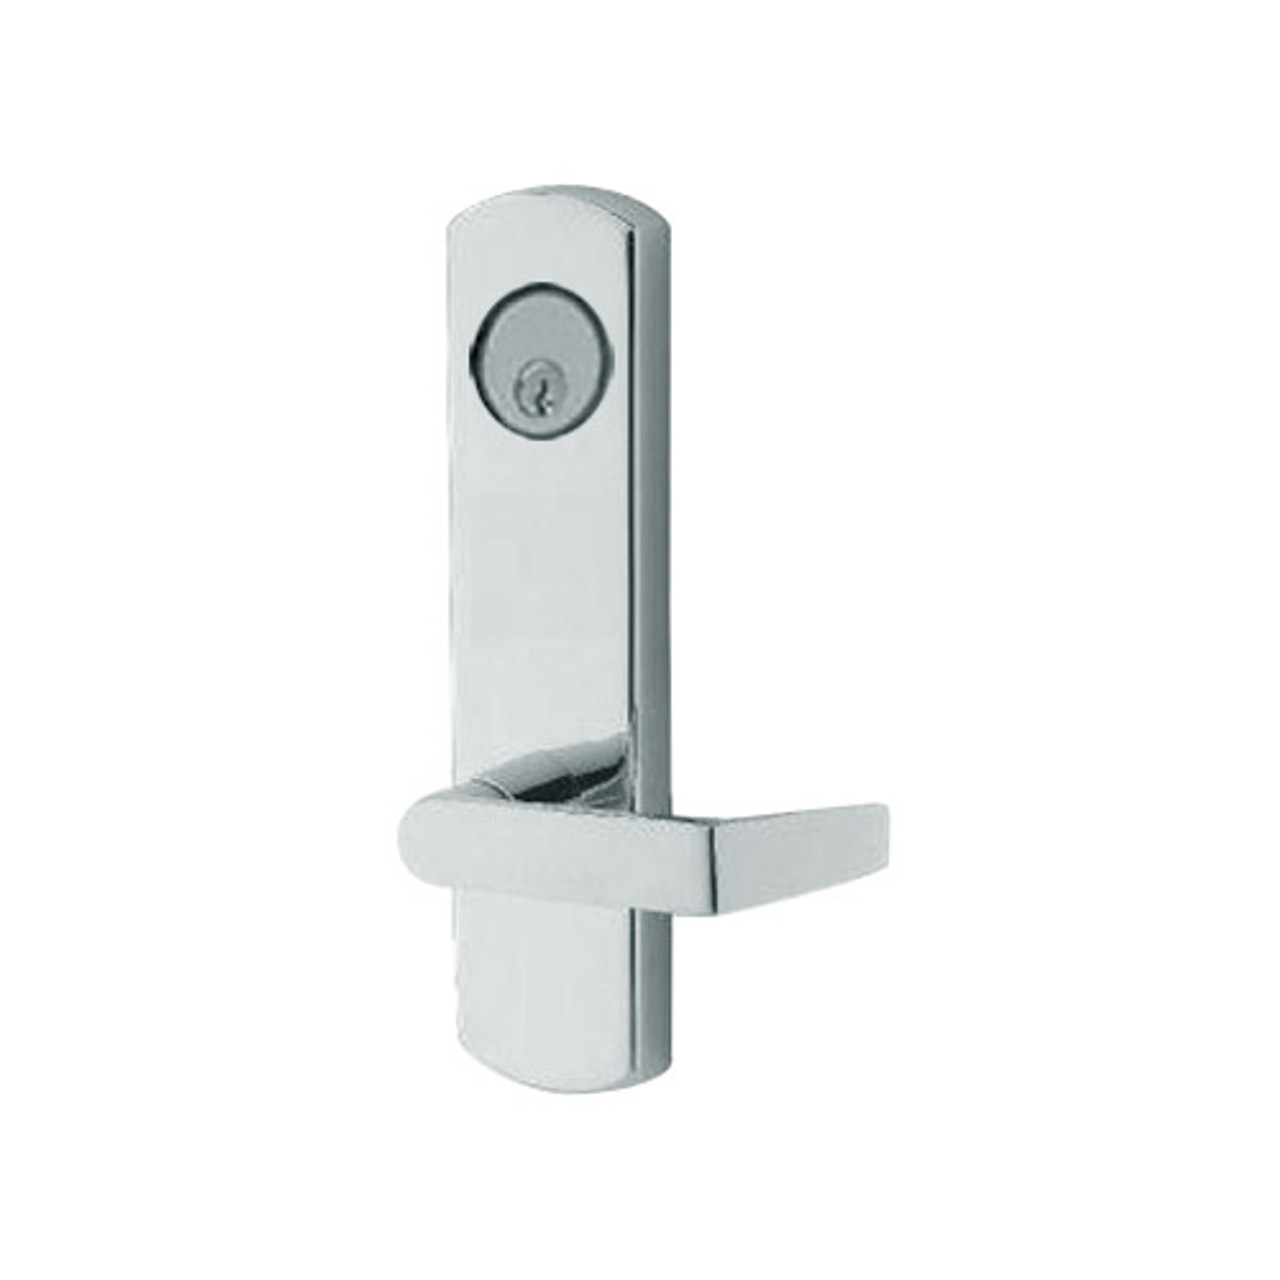 3080E-03-0-9U-35 US32 Adams Rite Electrified Entry Trim with Square Lever in Bright Stainless Finish